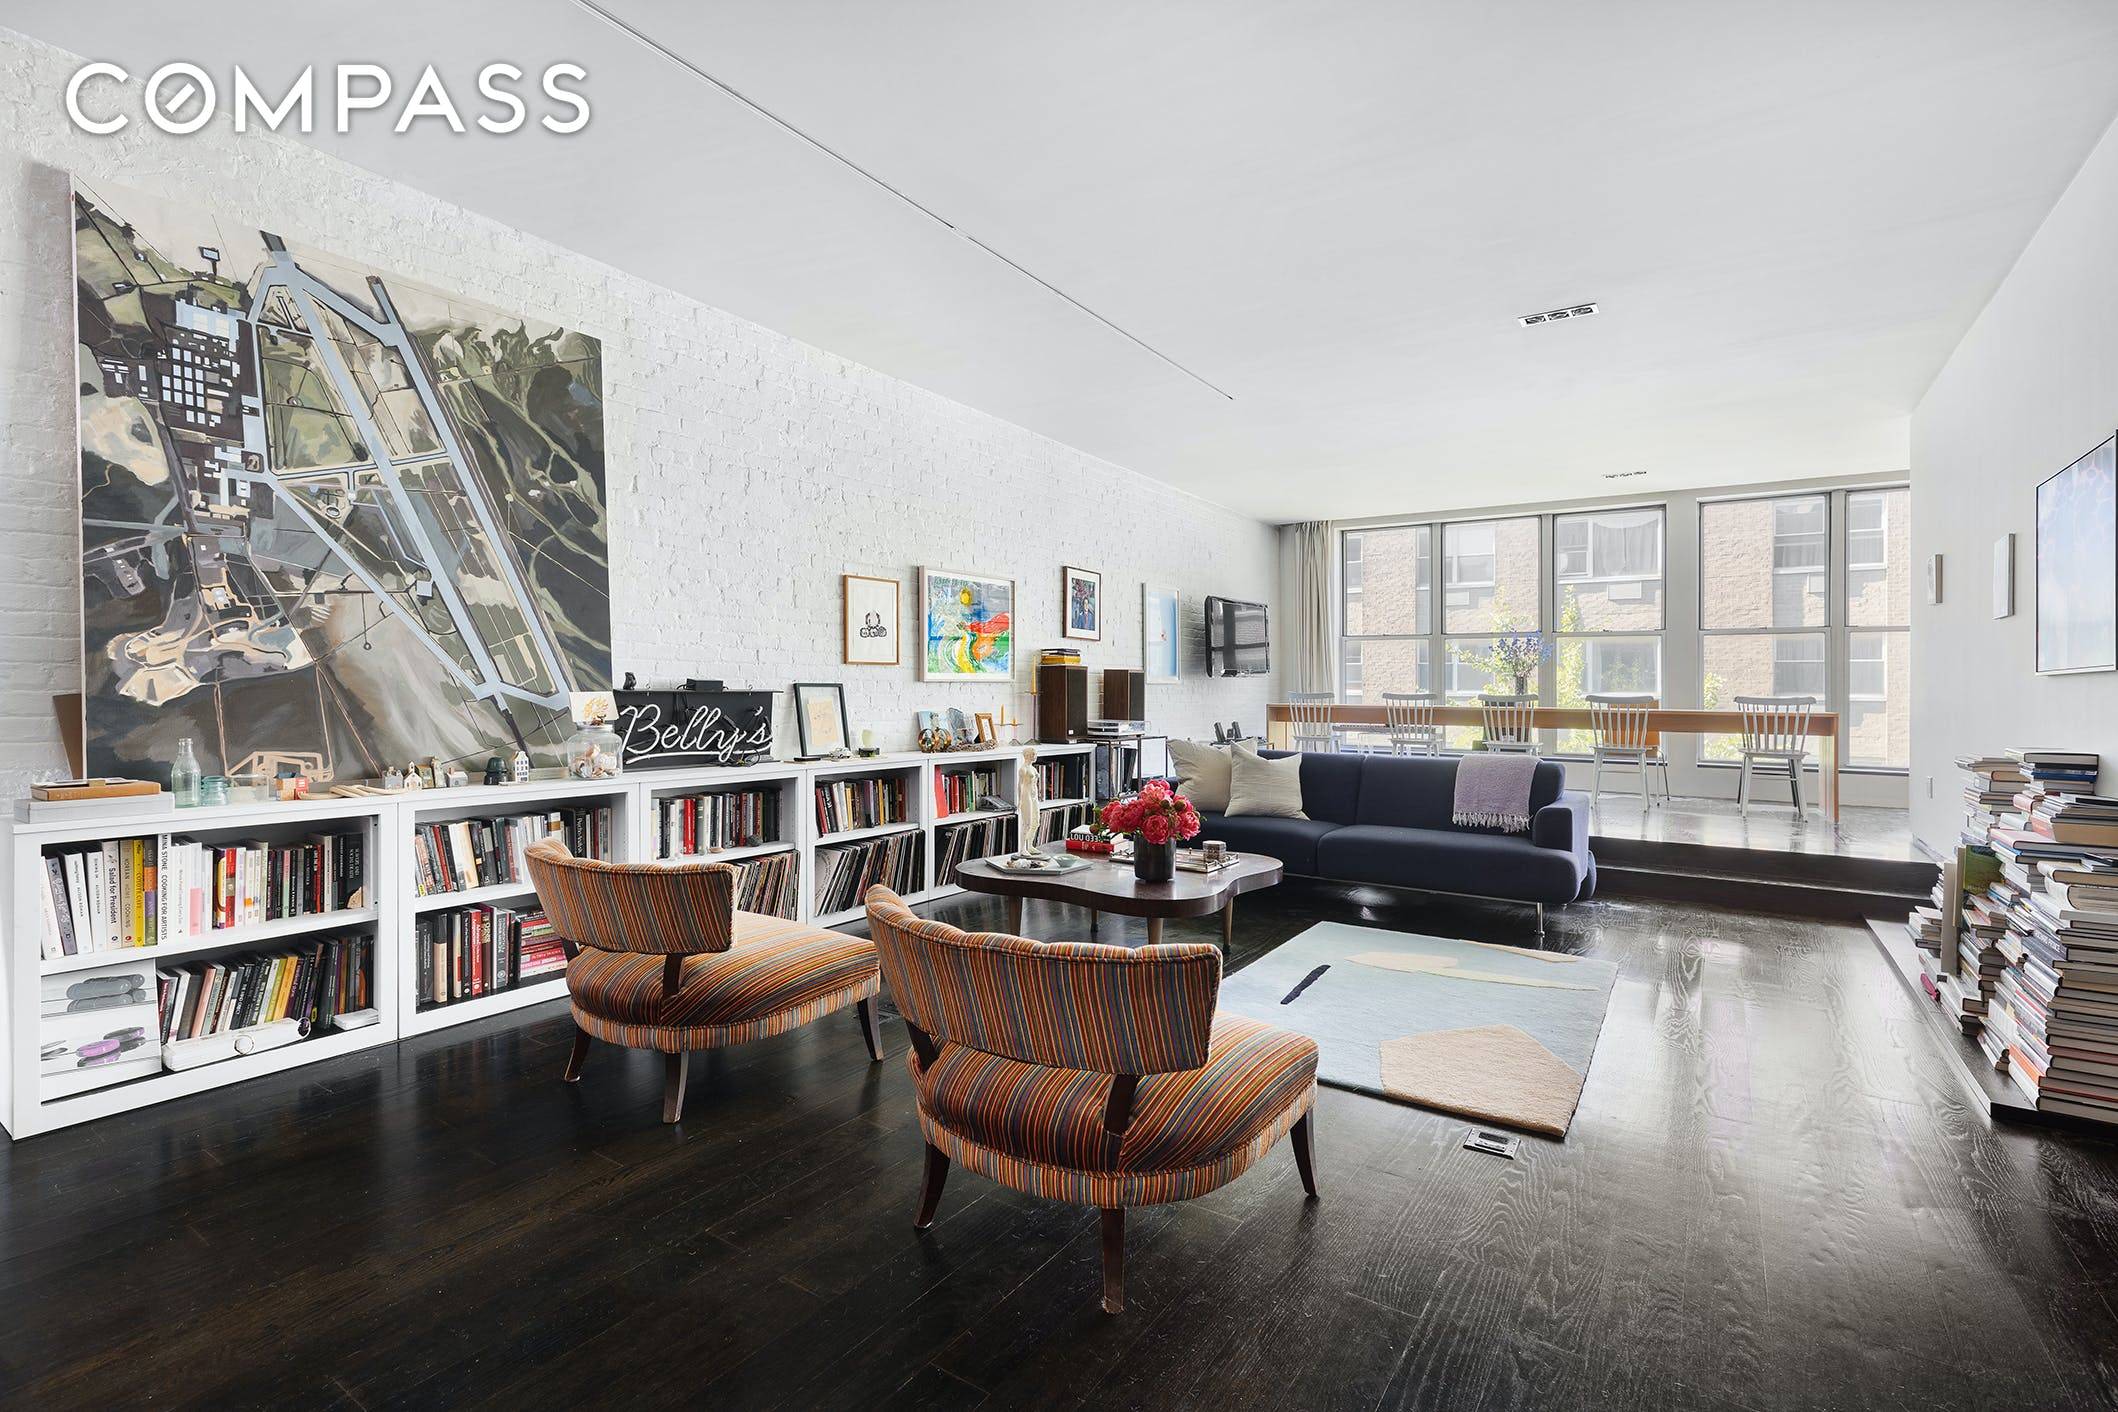 This fabulous, renovated artist s loft at the heart of downtown Manhattan is just moments away from everything the city s most vibrant and hip neighborhoods have to offer.